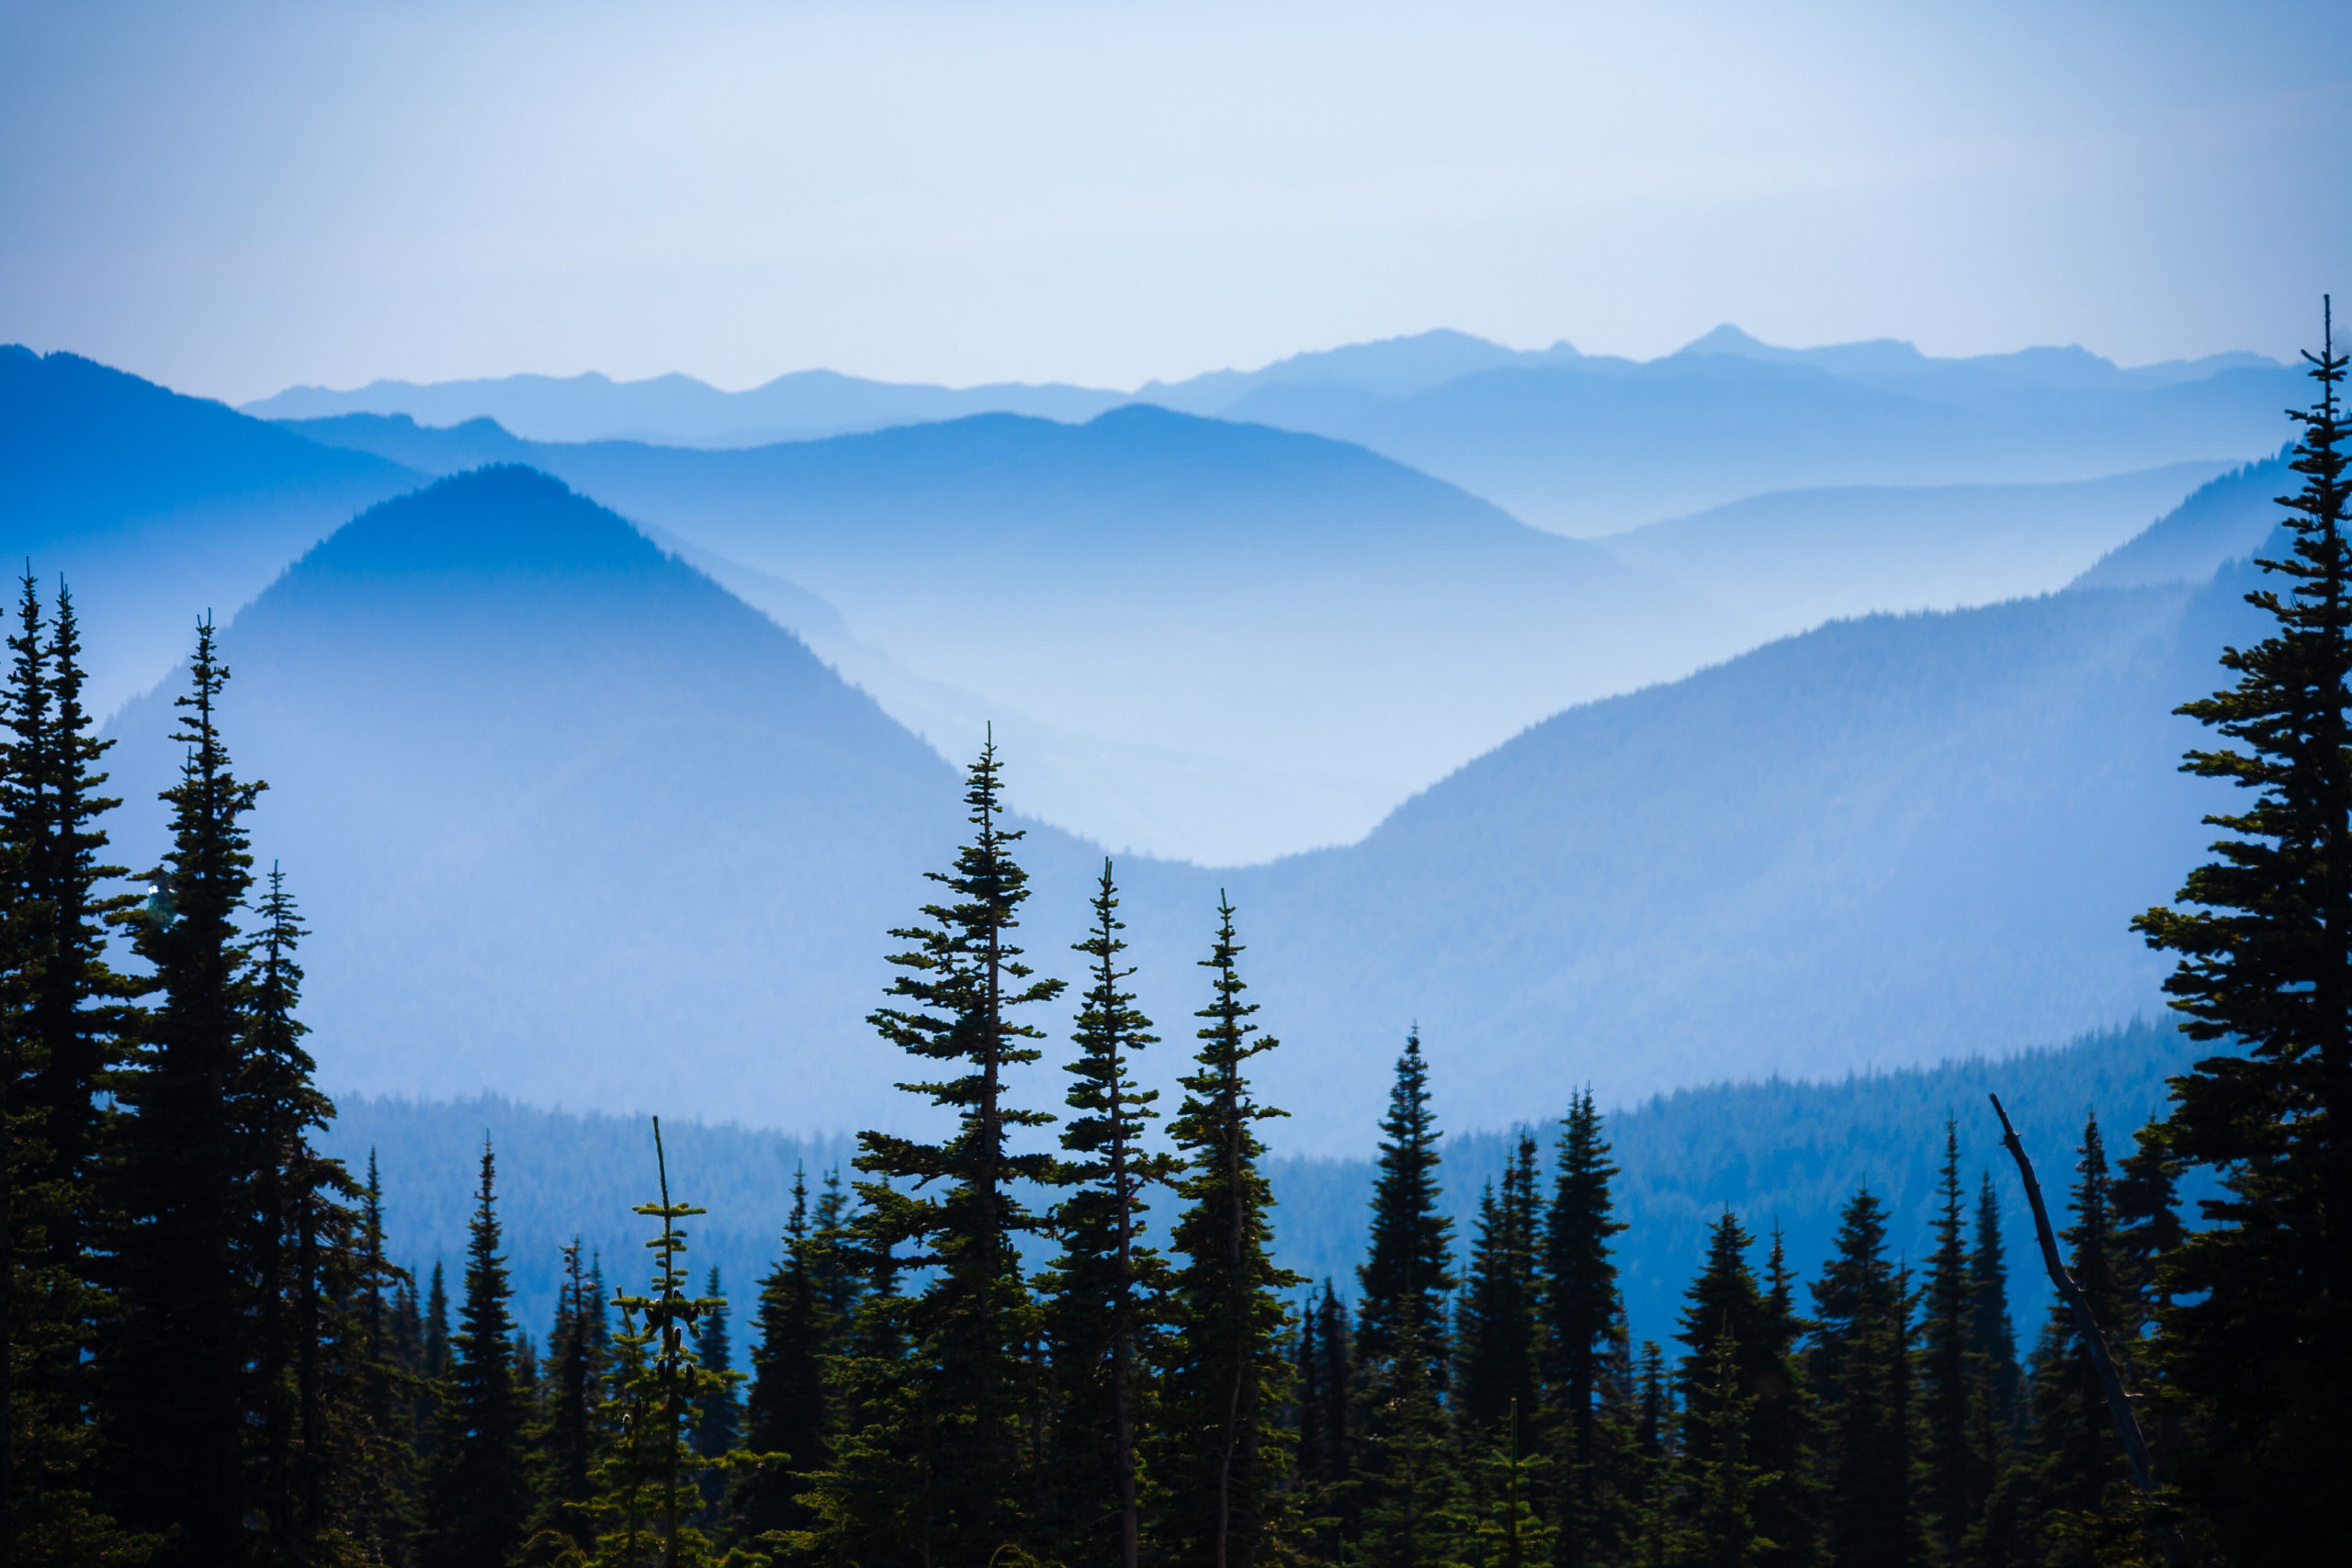 Hazy scenic view of mountain ranges in Mt. Rainier National Park.